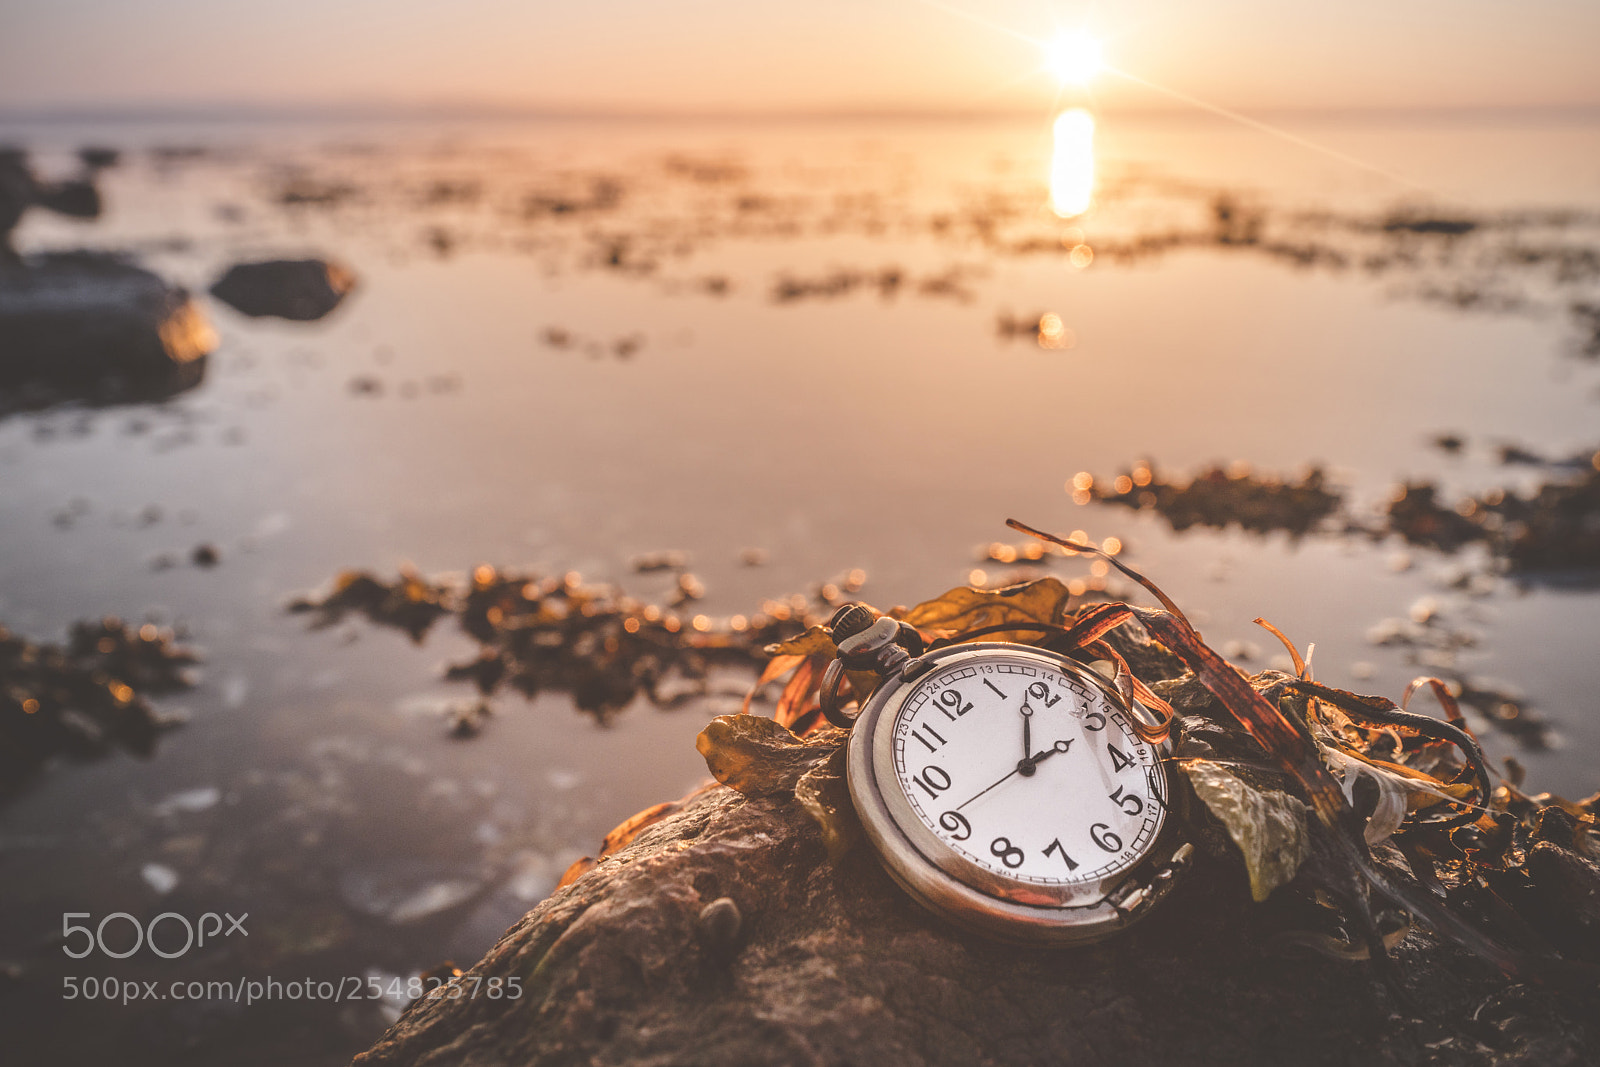 Sony a99 II sample photo. Antique pocket watch on photography